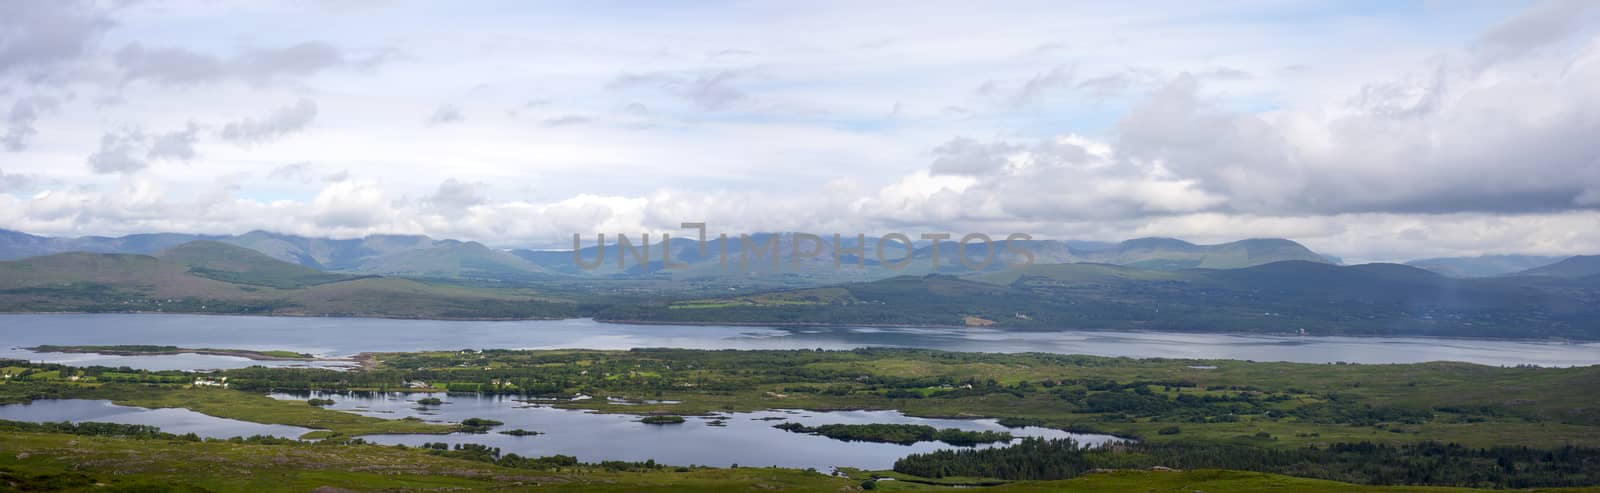 beautiful panorama from the kerry way by morrbyte